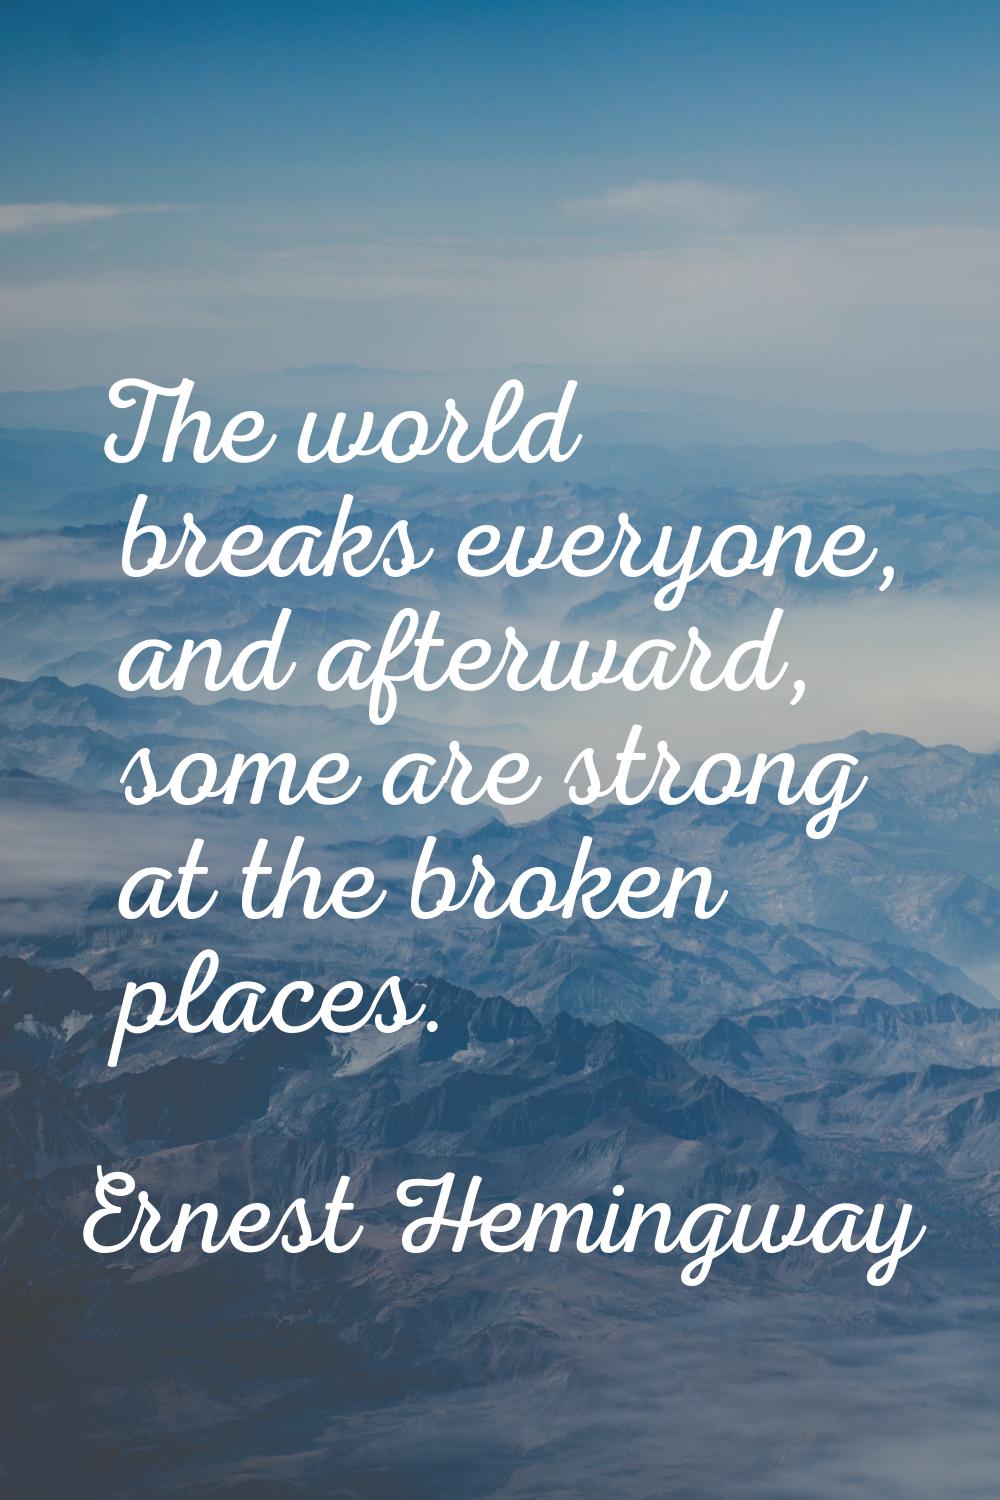 The world breaks everyone, and afterward, some are strong at the broken places.